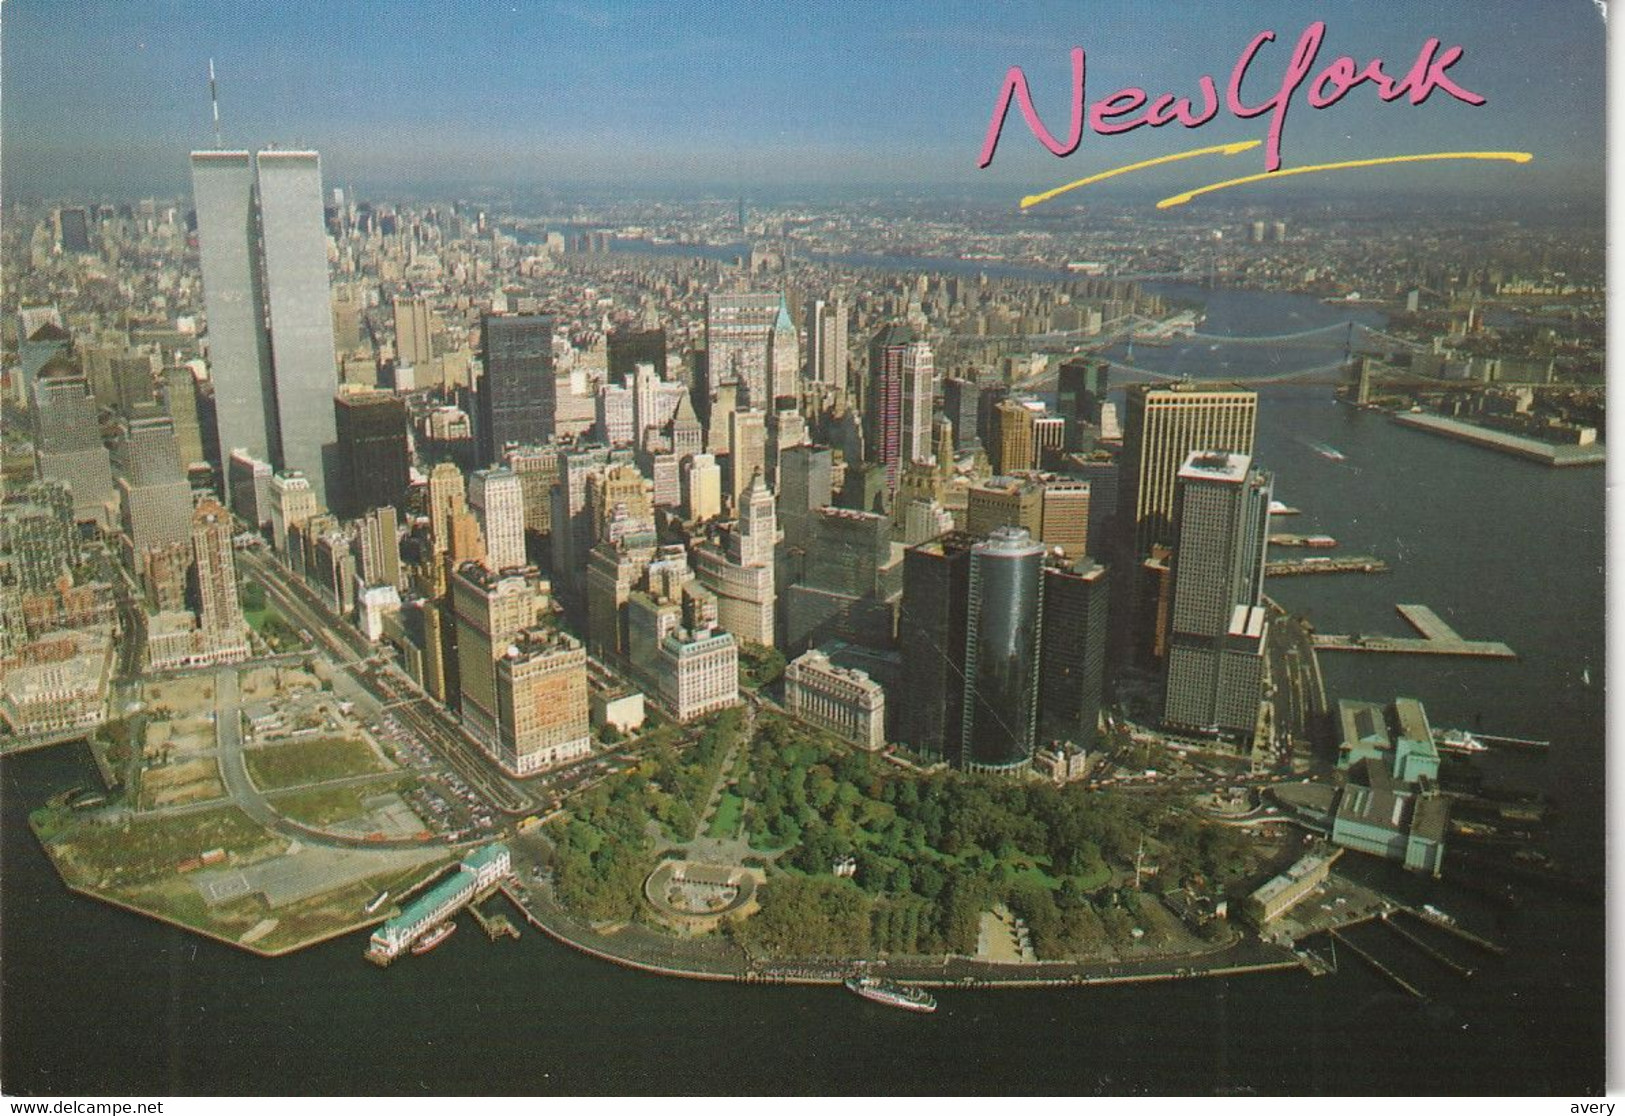 New York City Manhattan Panoramic View - Multi-vues, Vues Panoramiques